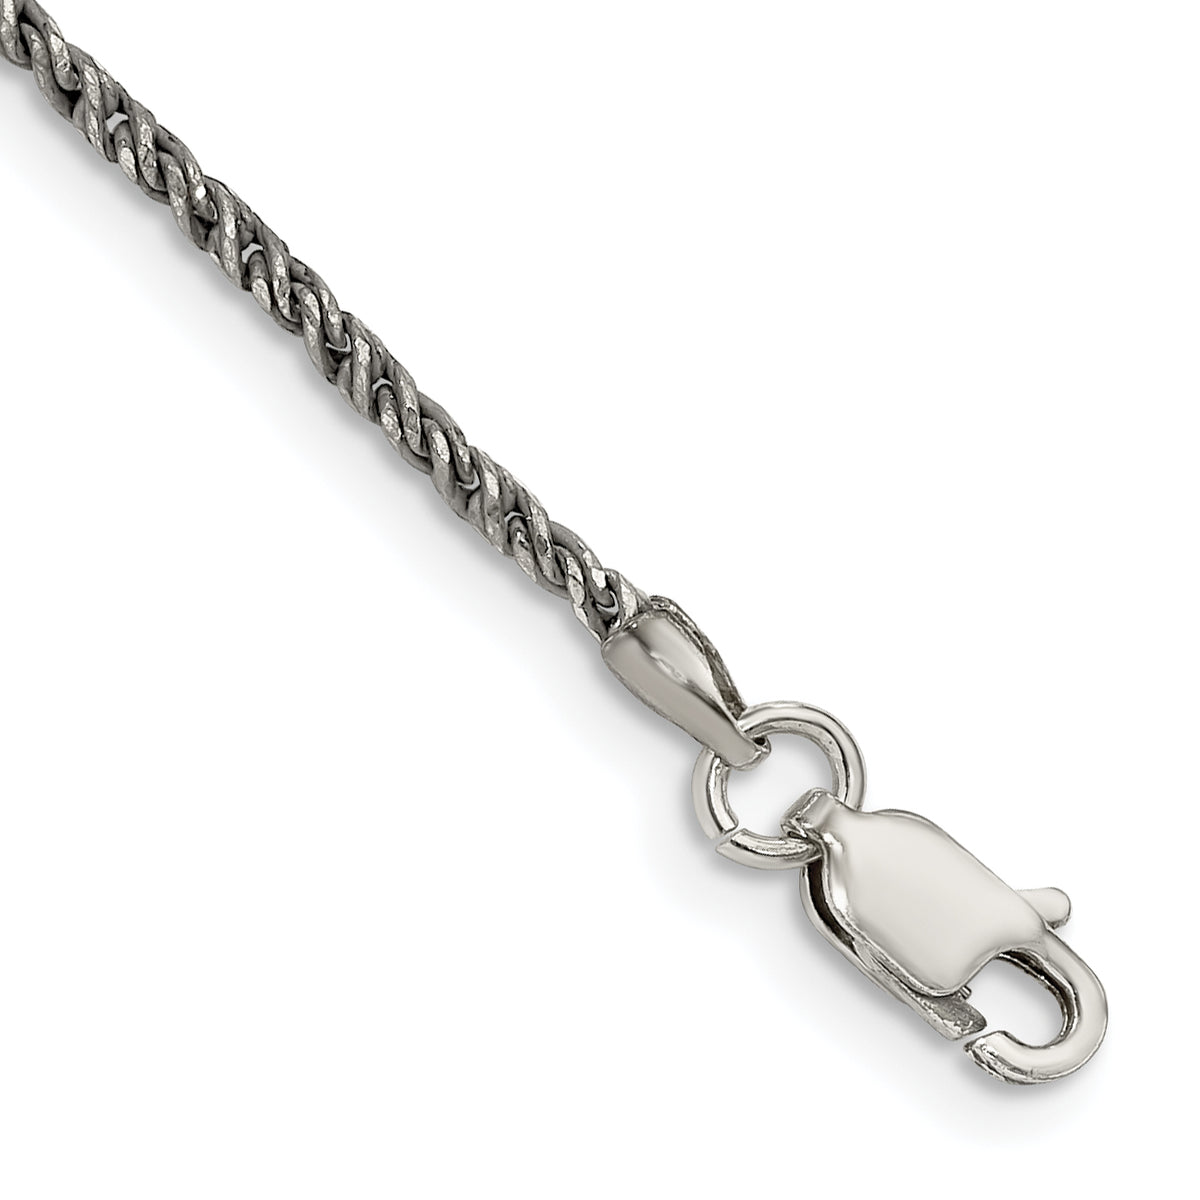 Sterling Silver Ruthenium-plated 1.7mm Twisted Tight Wheat Chain